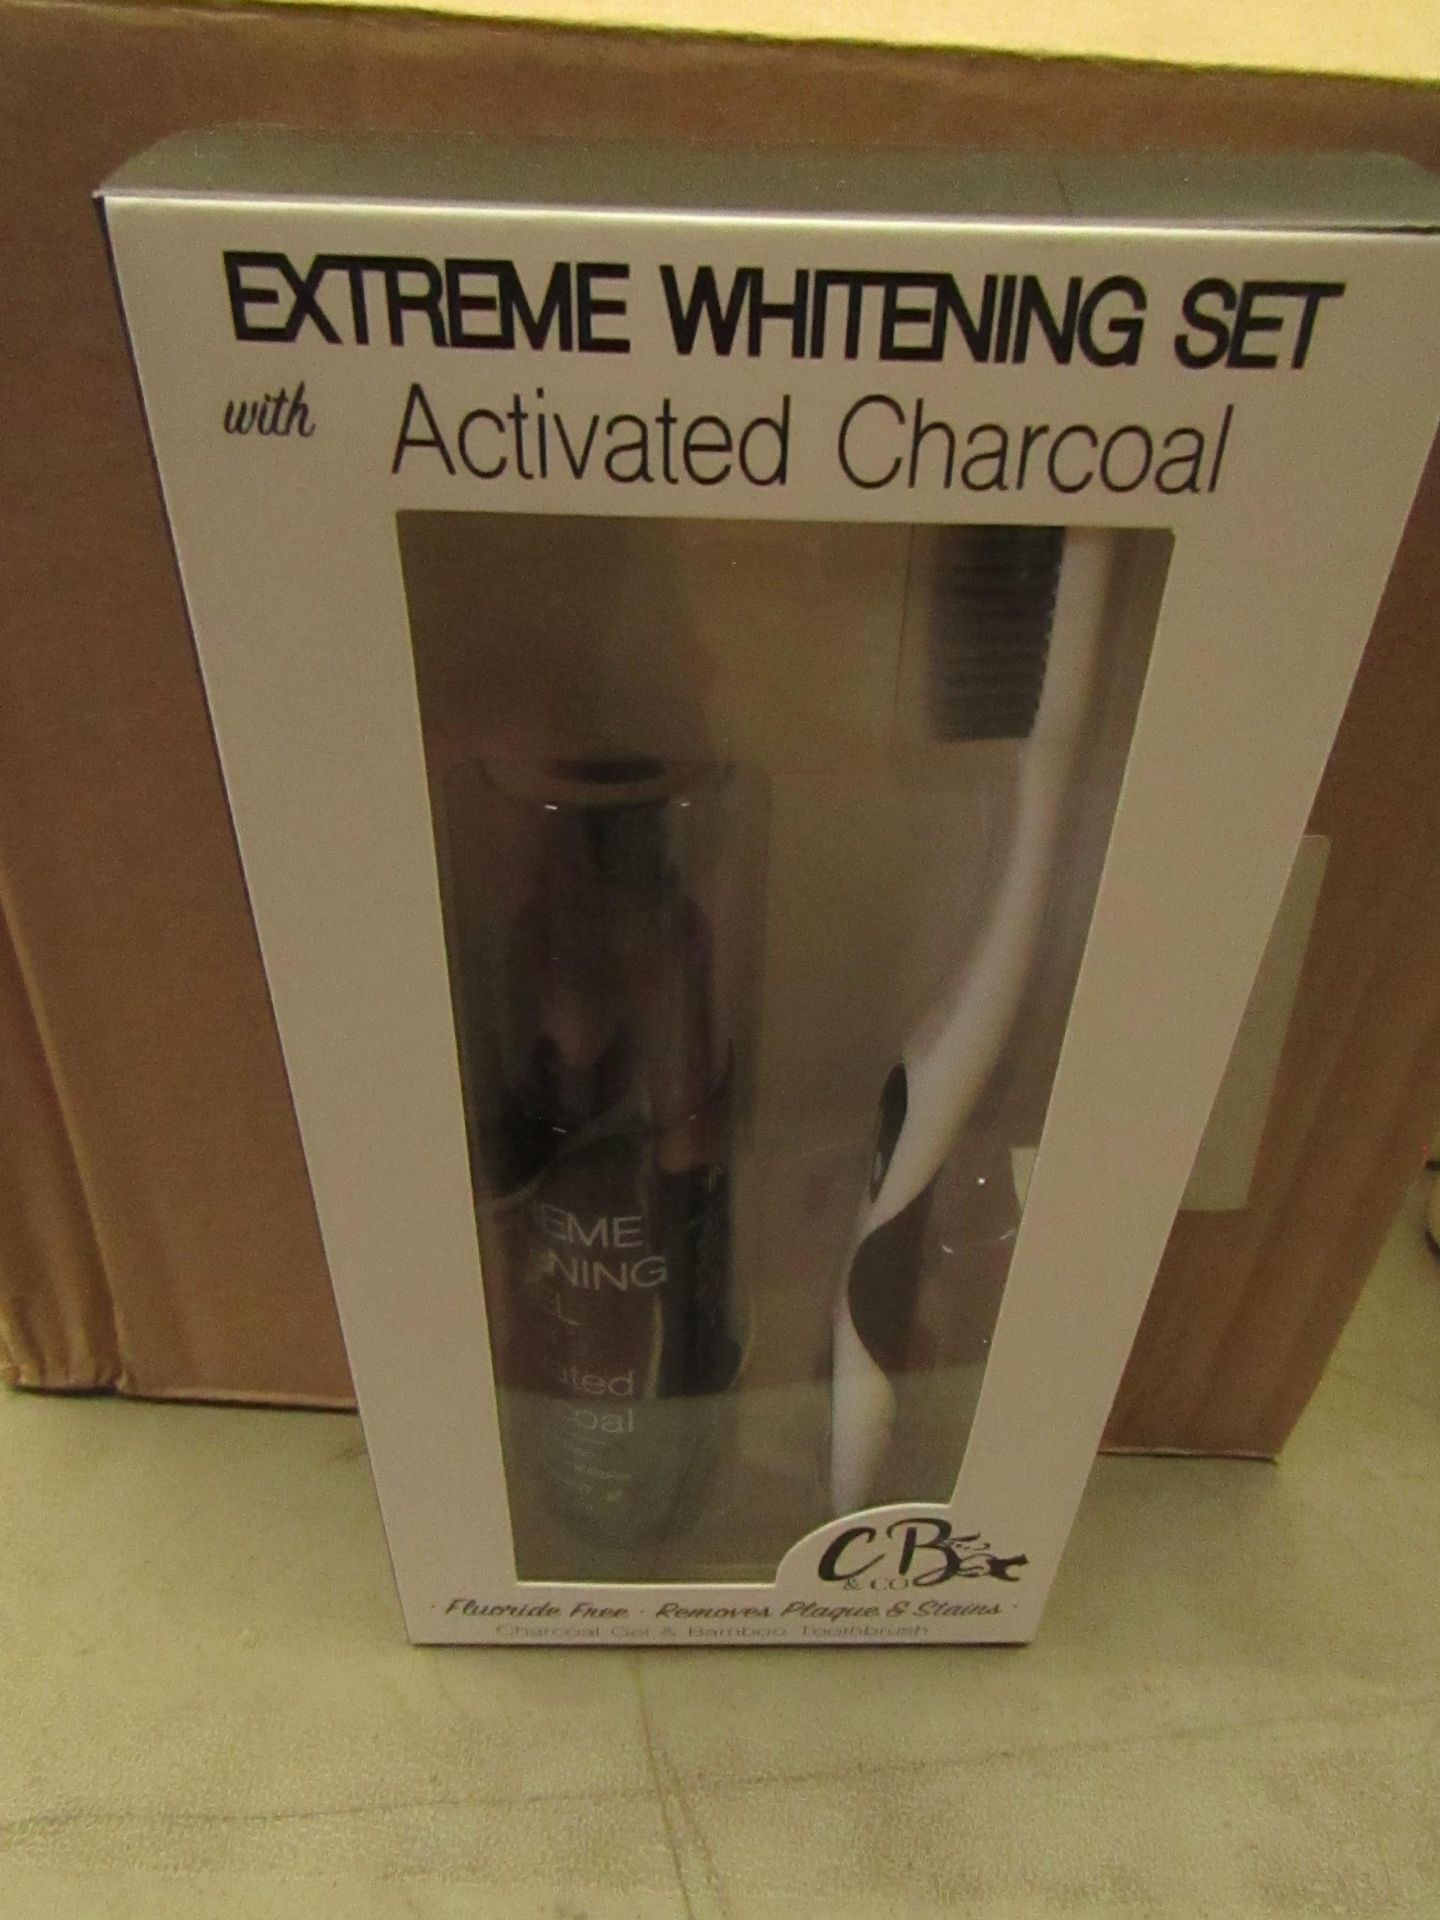 Box of 8x Charcoal Activated extreme teeth Whitening set, includes the Charcoal Gel and